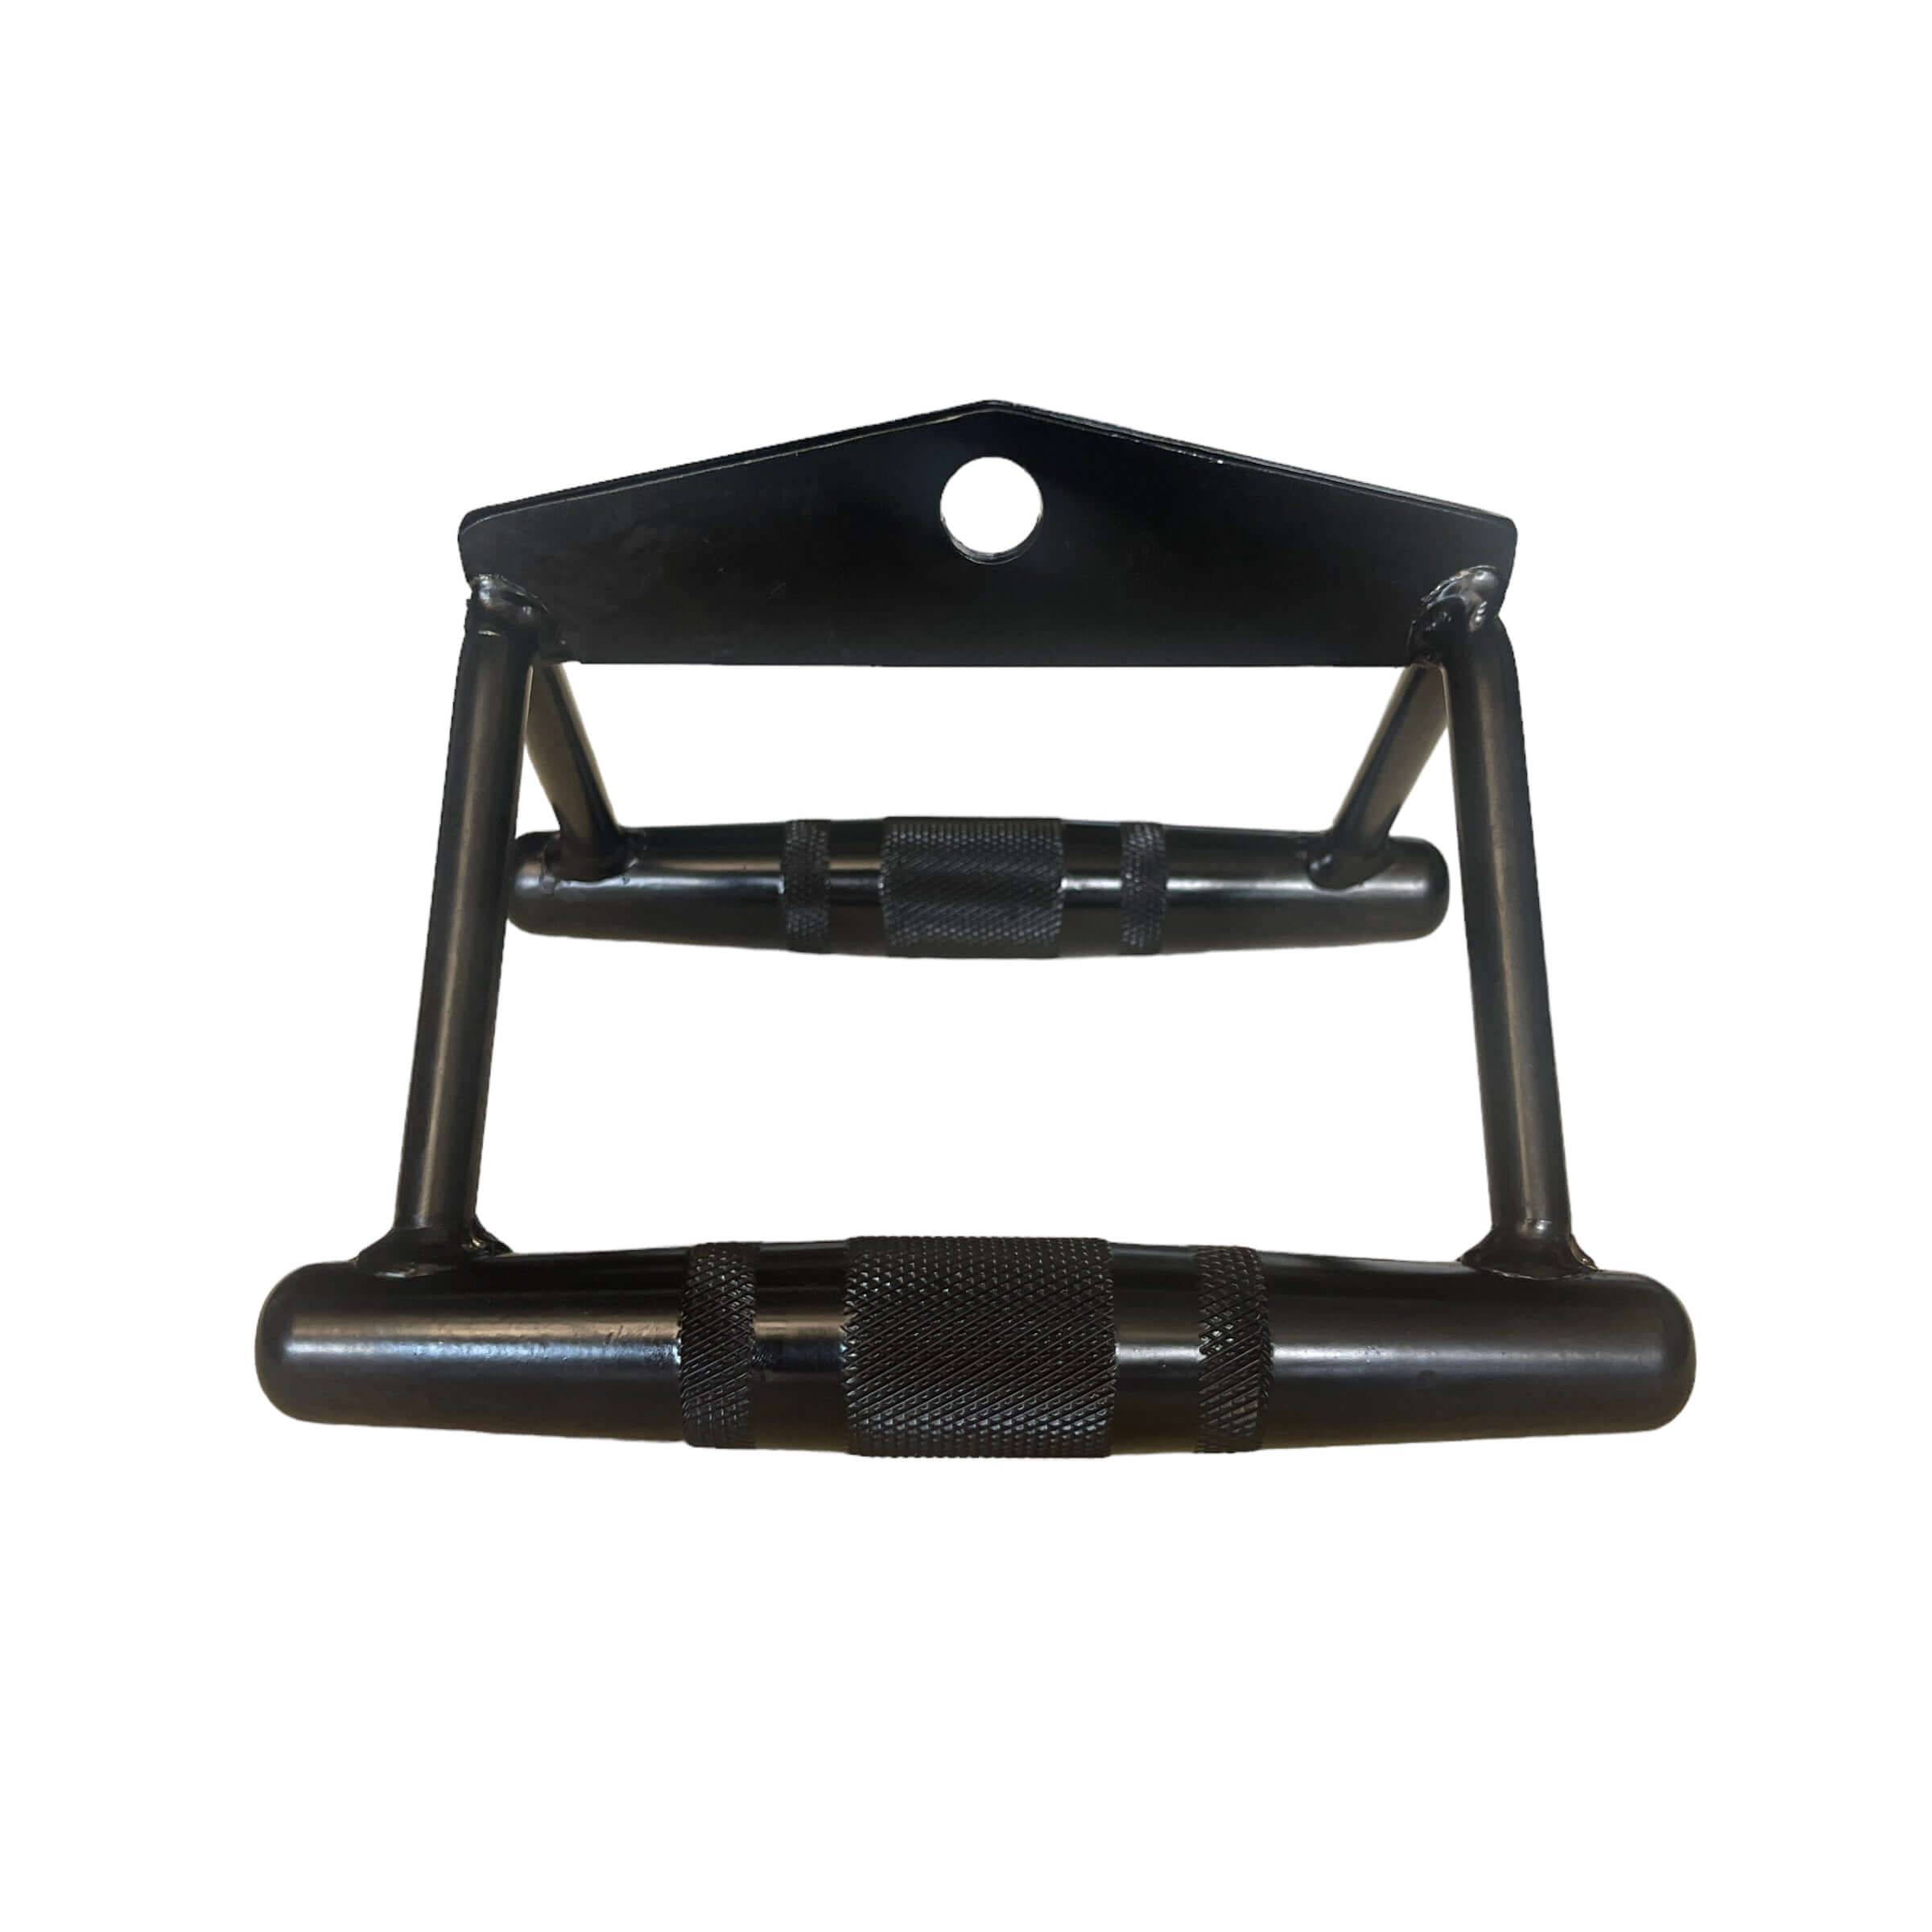 Black Steel Triangle Close Grip Row Cable Attachment | INSOURCE